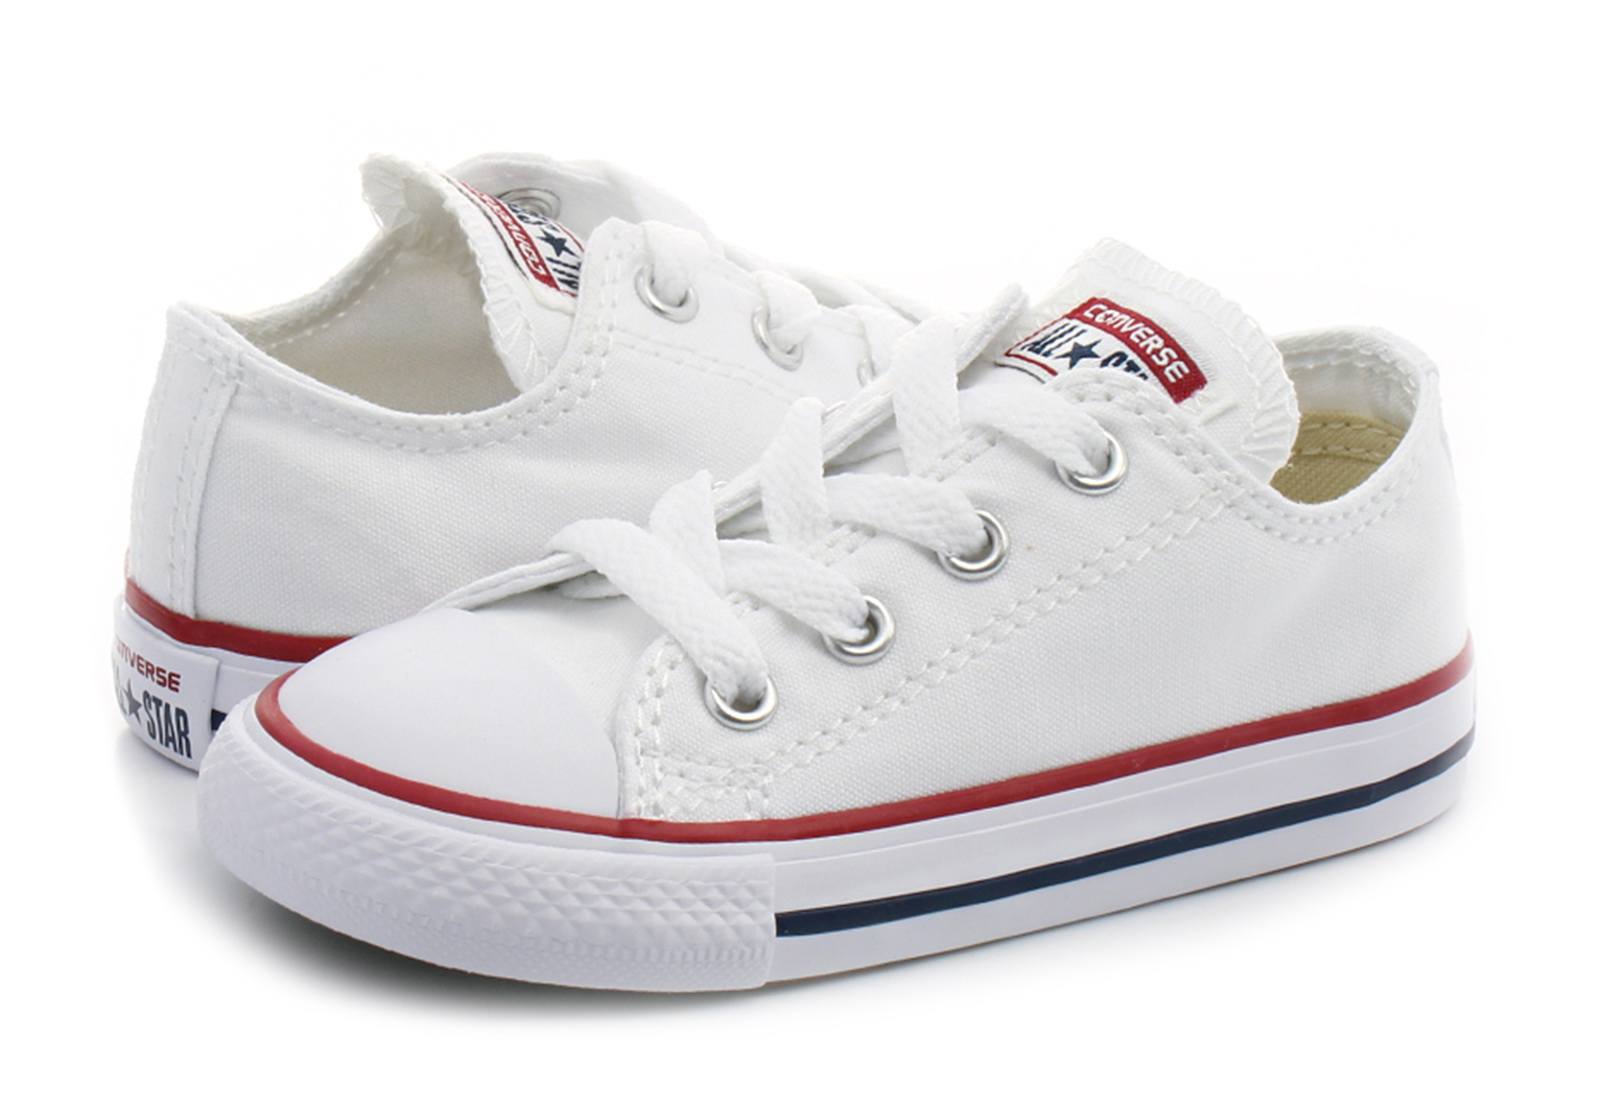 Converse Shoes - Chuck Taylor All Star - 7J256C - Online shop for sneakers,  shoes and boots